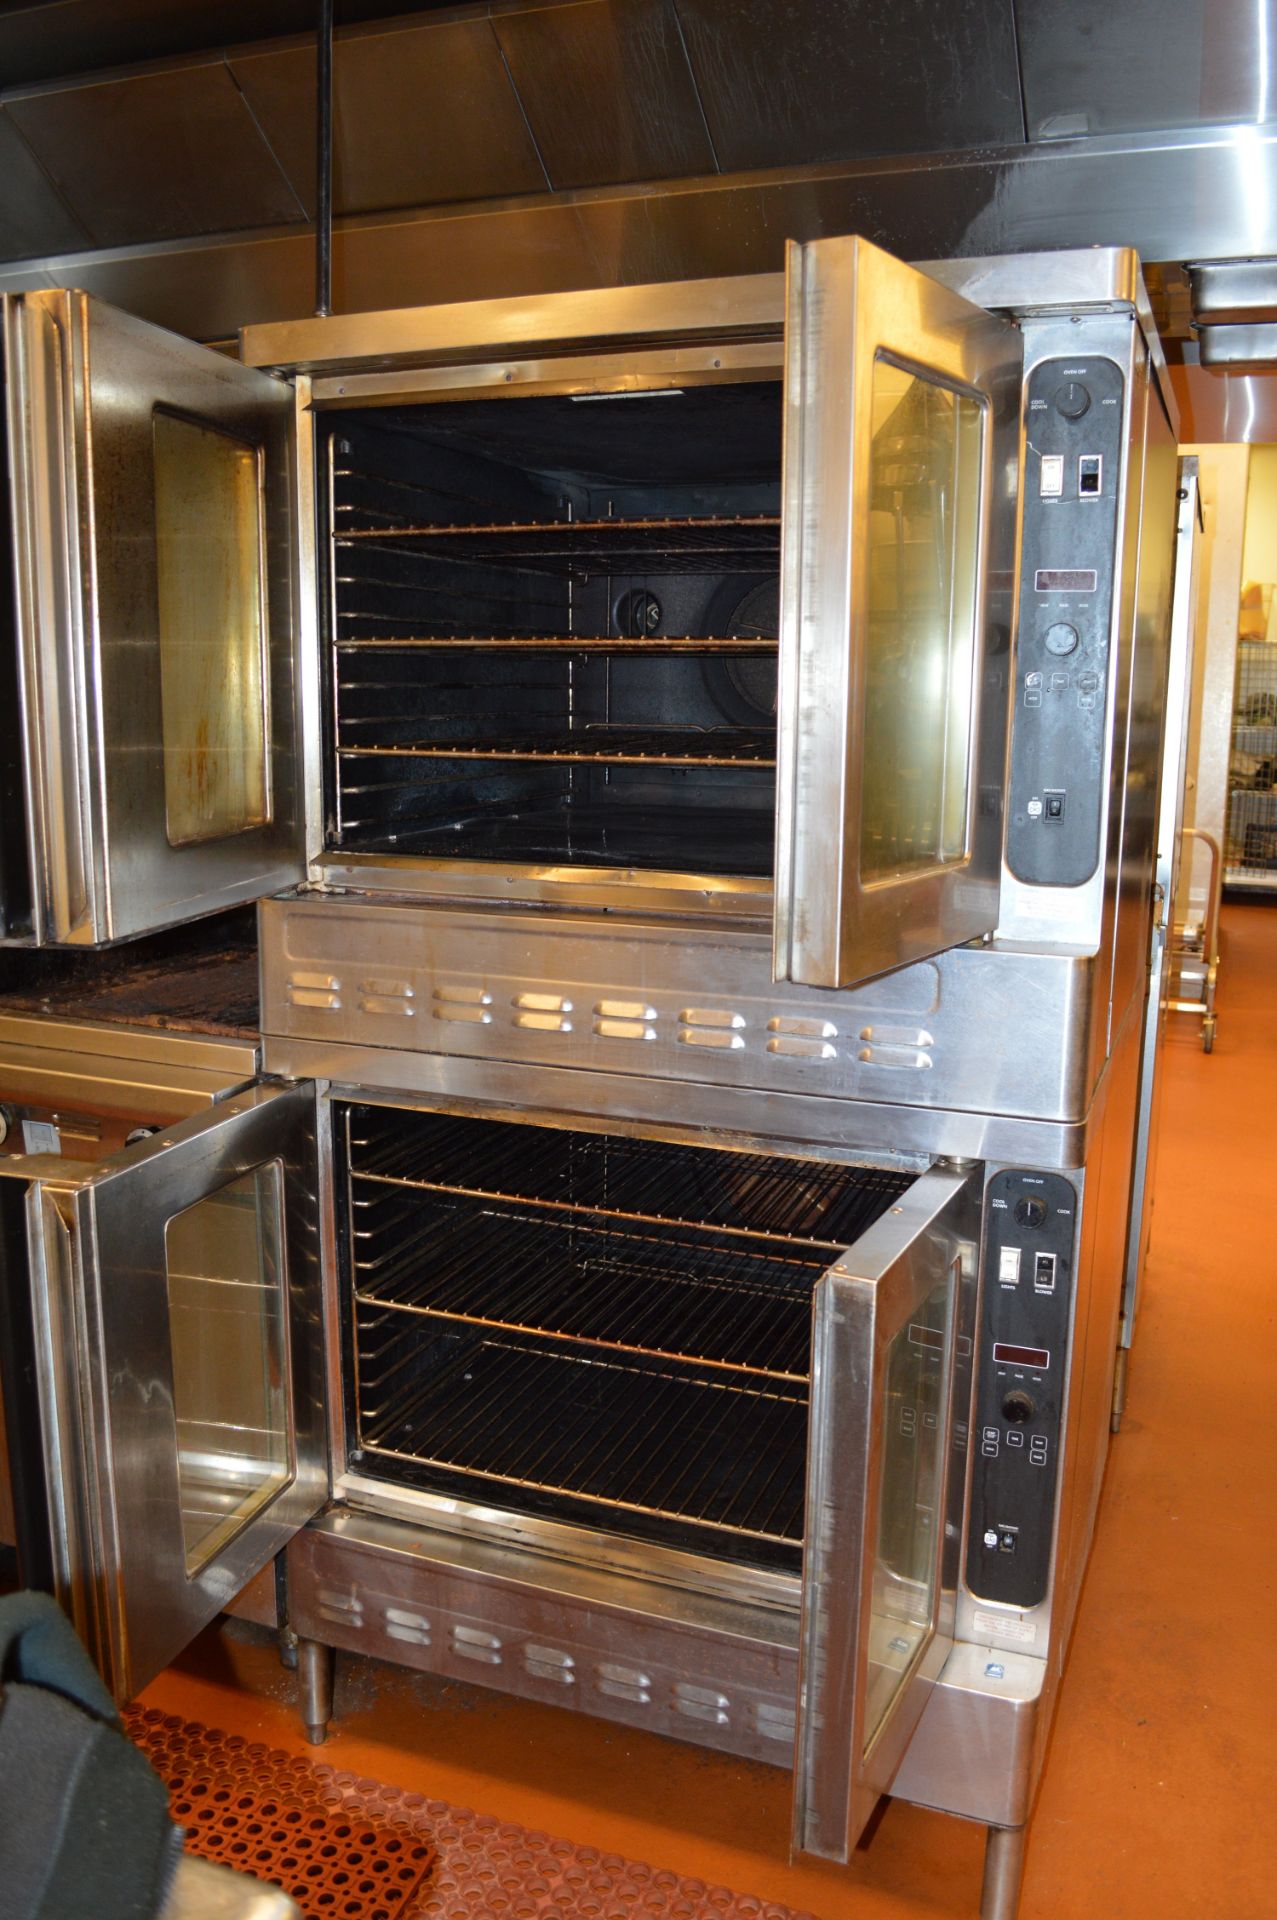 DOUBLE STACK BLODGETT CONVECTION OVENS PRICED PER PIECE (2XMONEY) - Image 2 of 6